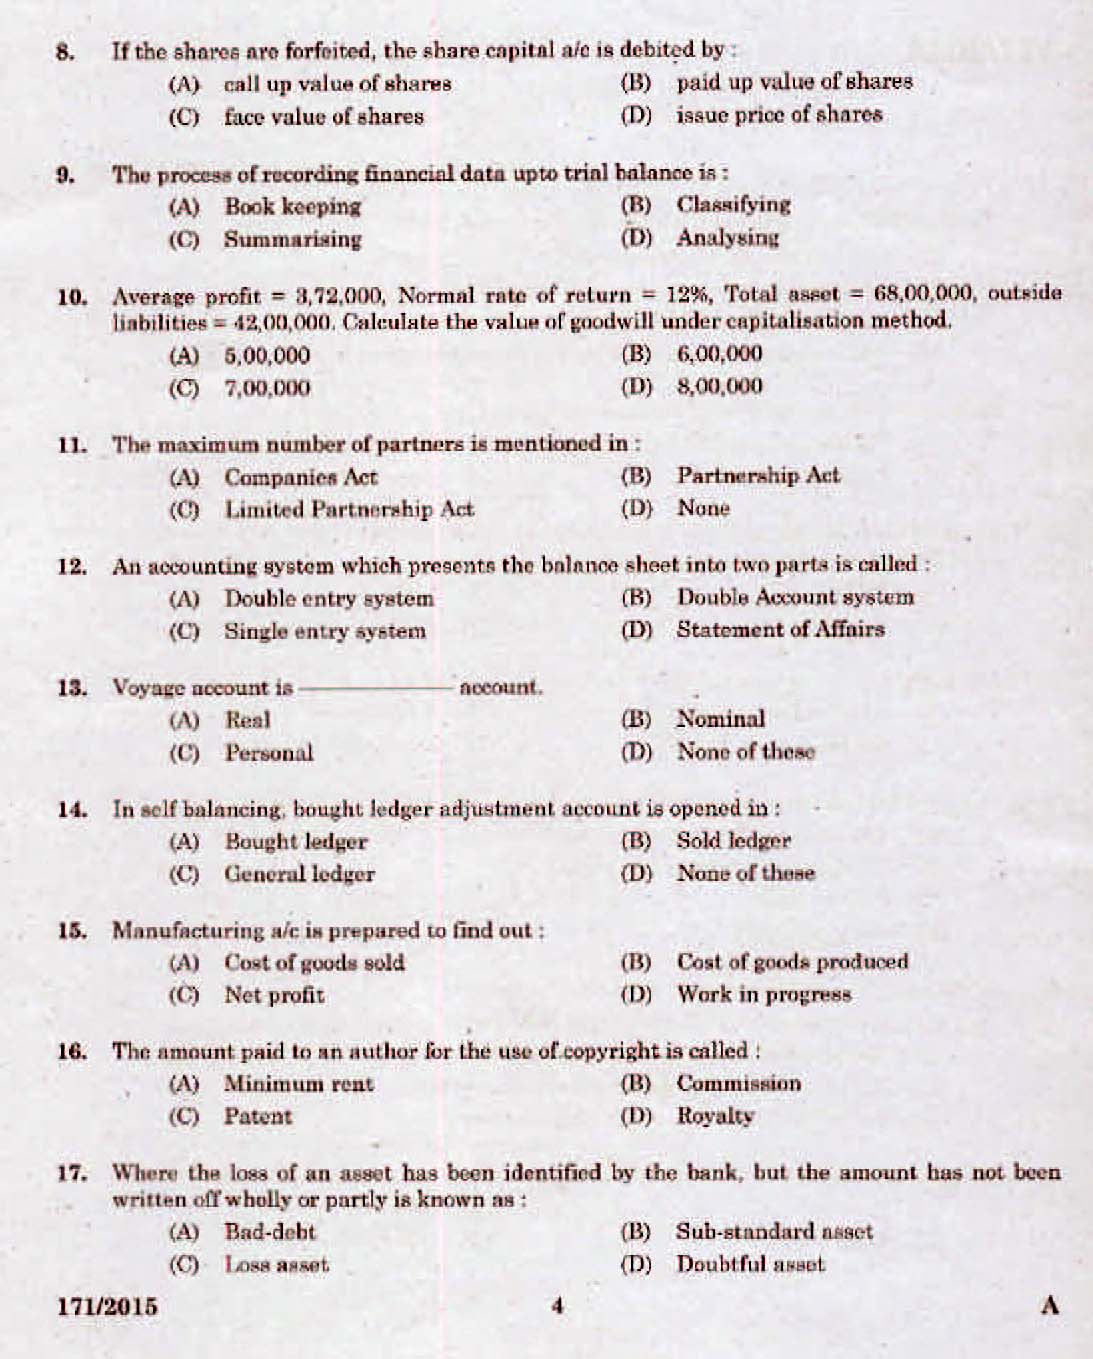 Kerala PSC Lower Division Accountant OMR Exam 2015 Question Paper Code 1712015 2